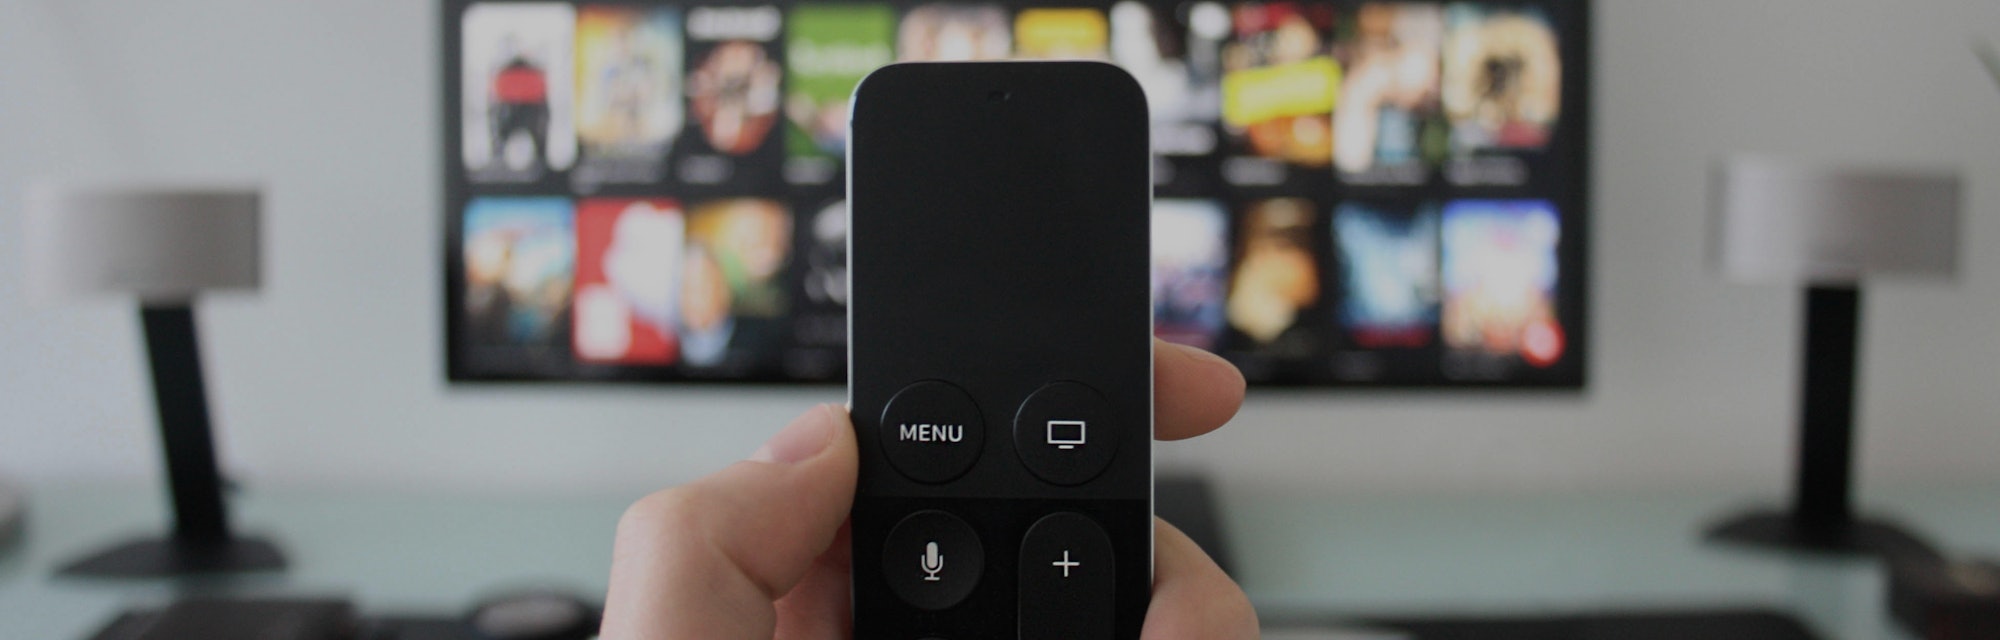 Hand holding a TV remote while watching shows on a streaming service on Television.